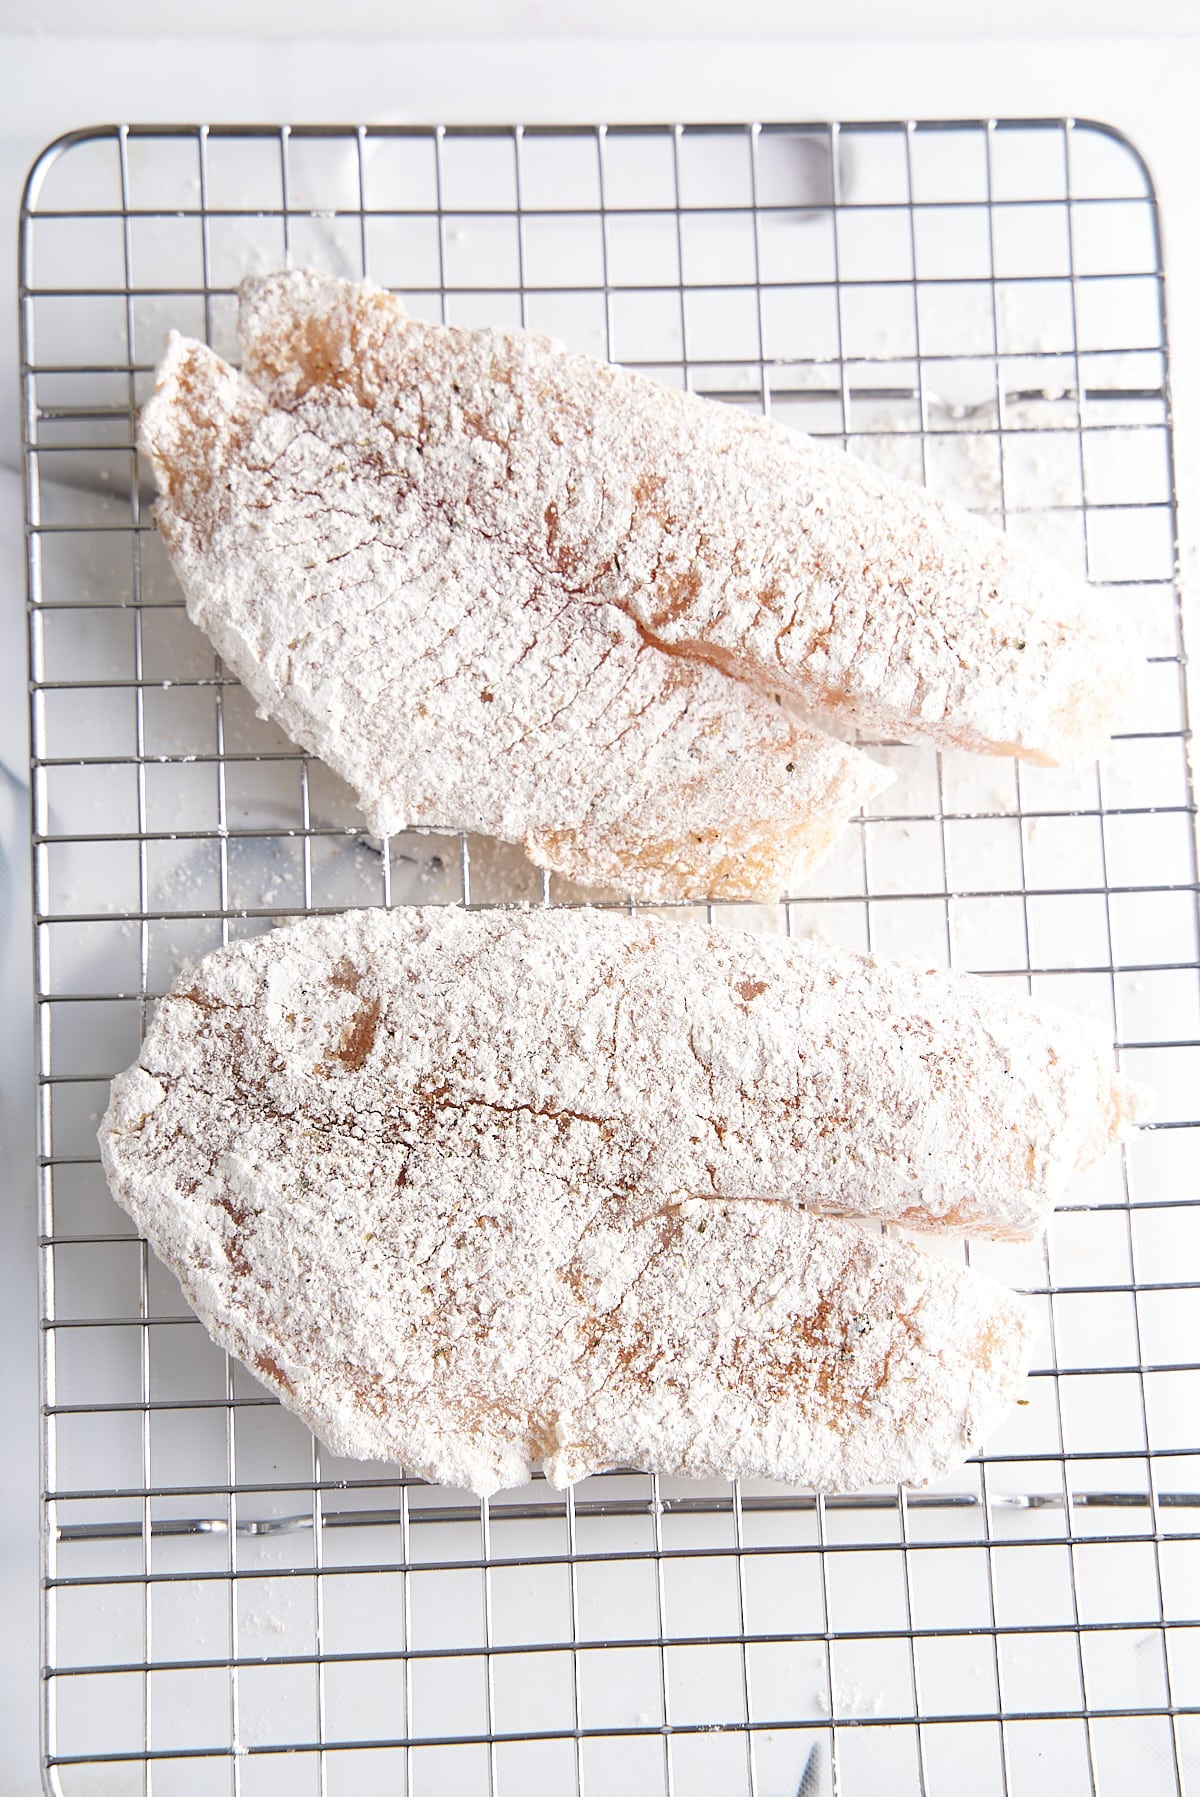 2 white fish filets coated in flour and resting on a wire rack.